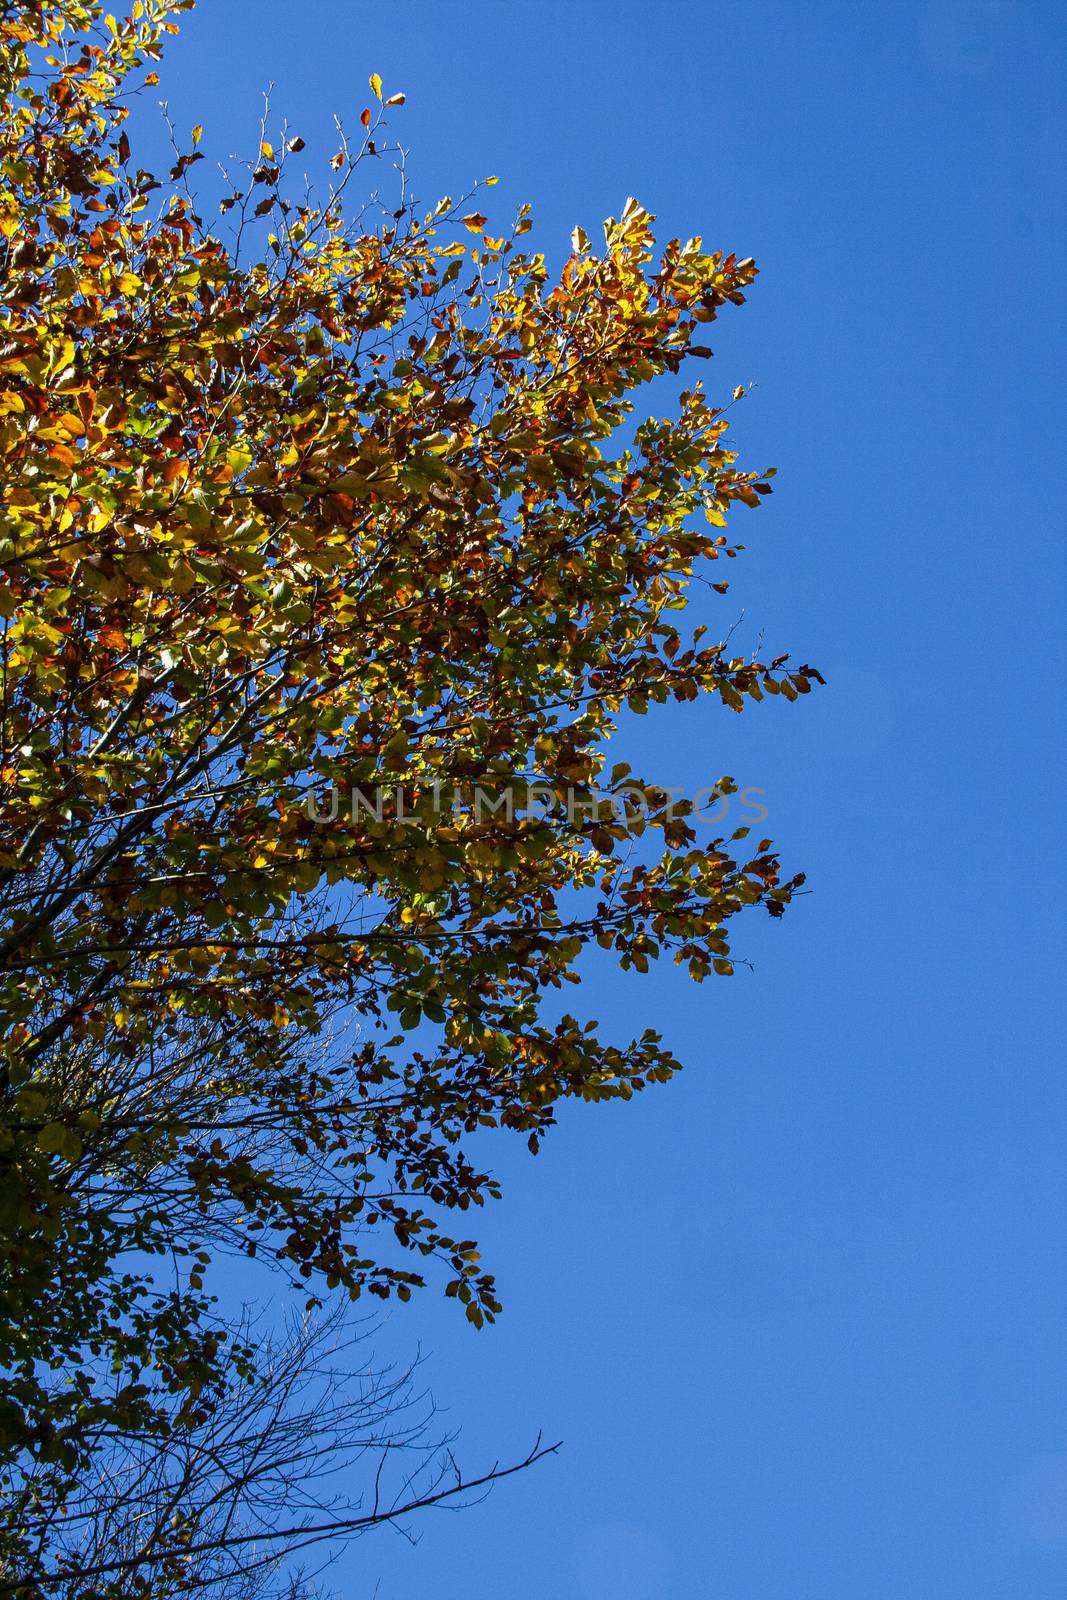 Tree in autumn detail with yellow leaves under a blue sky